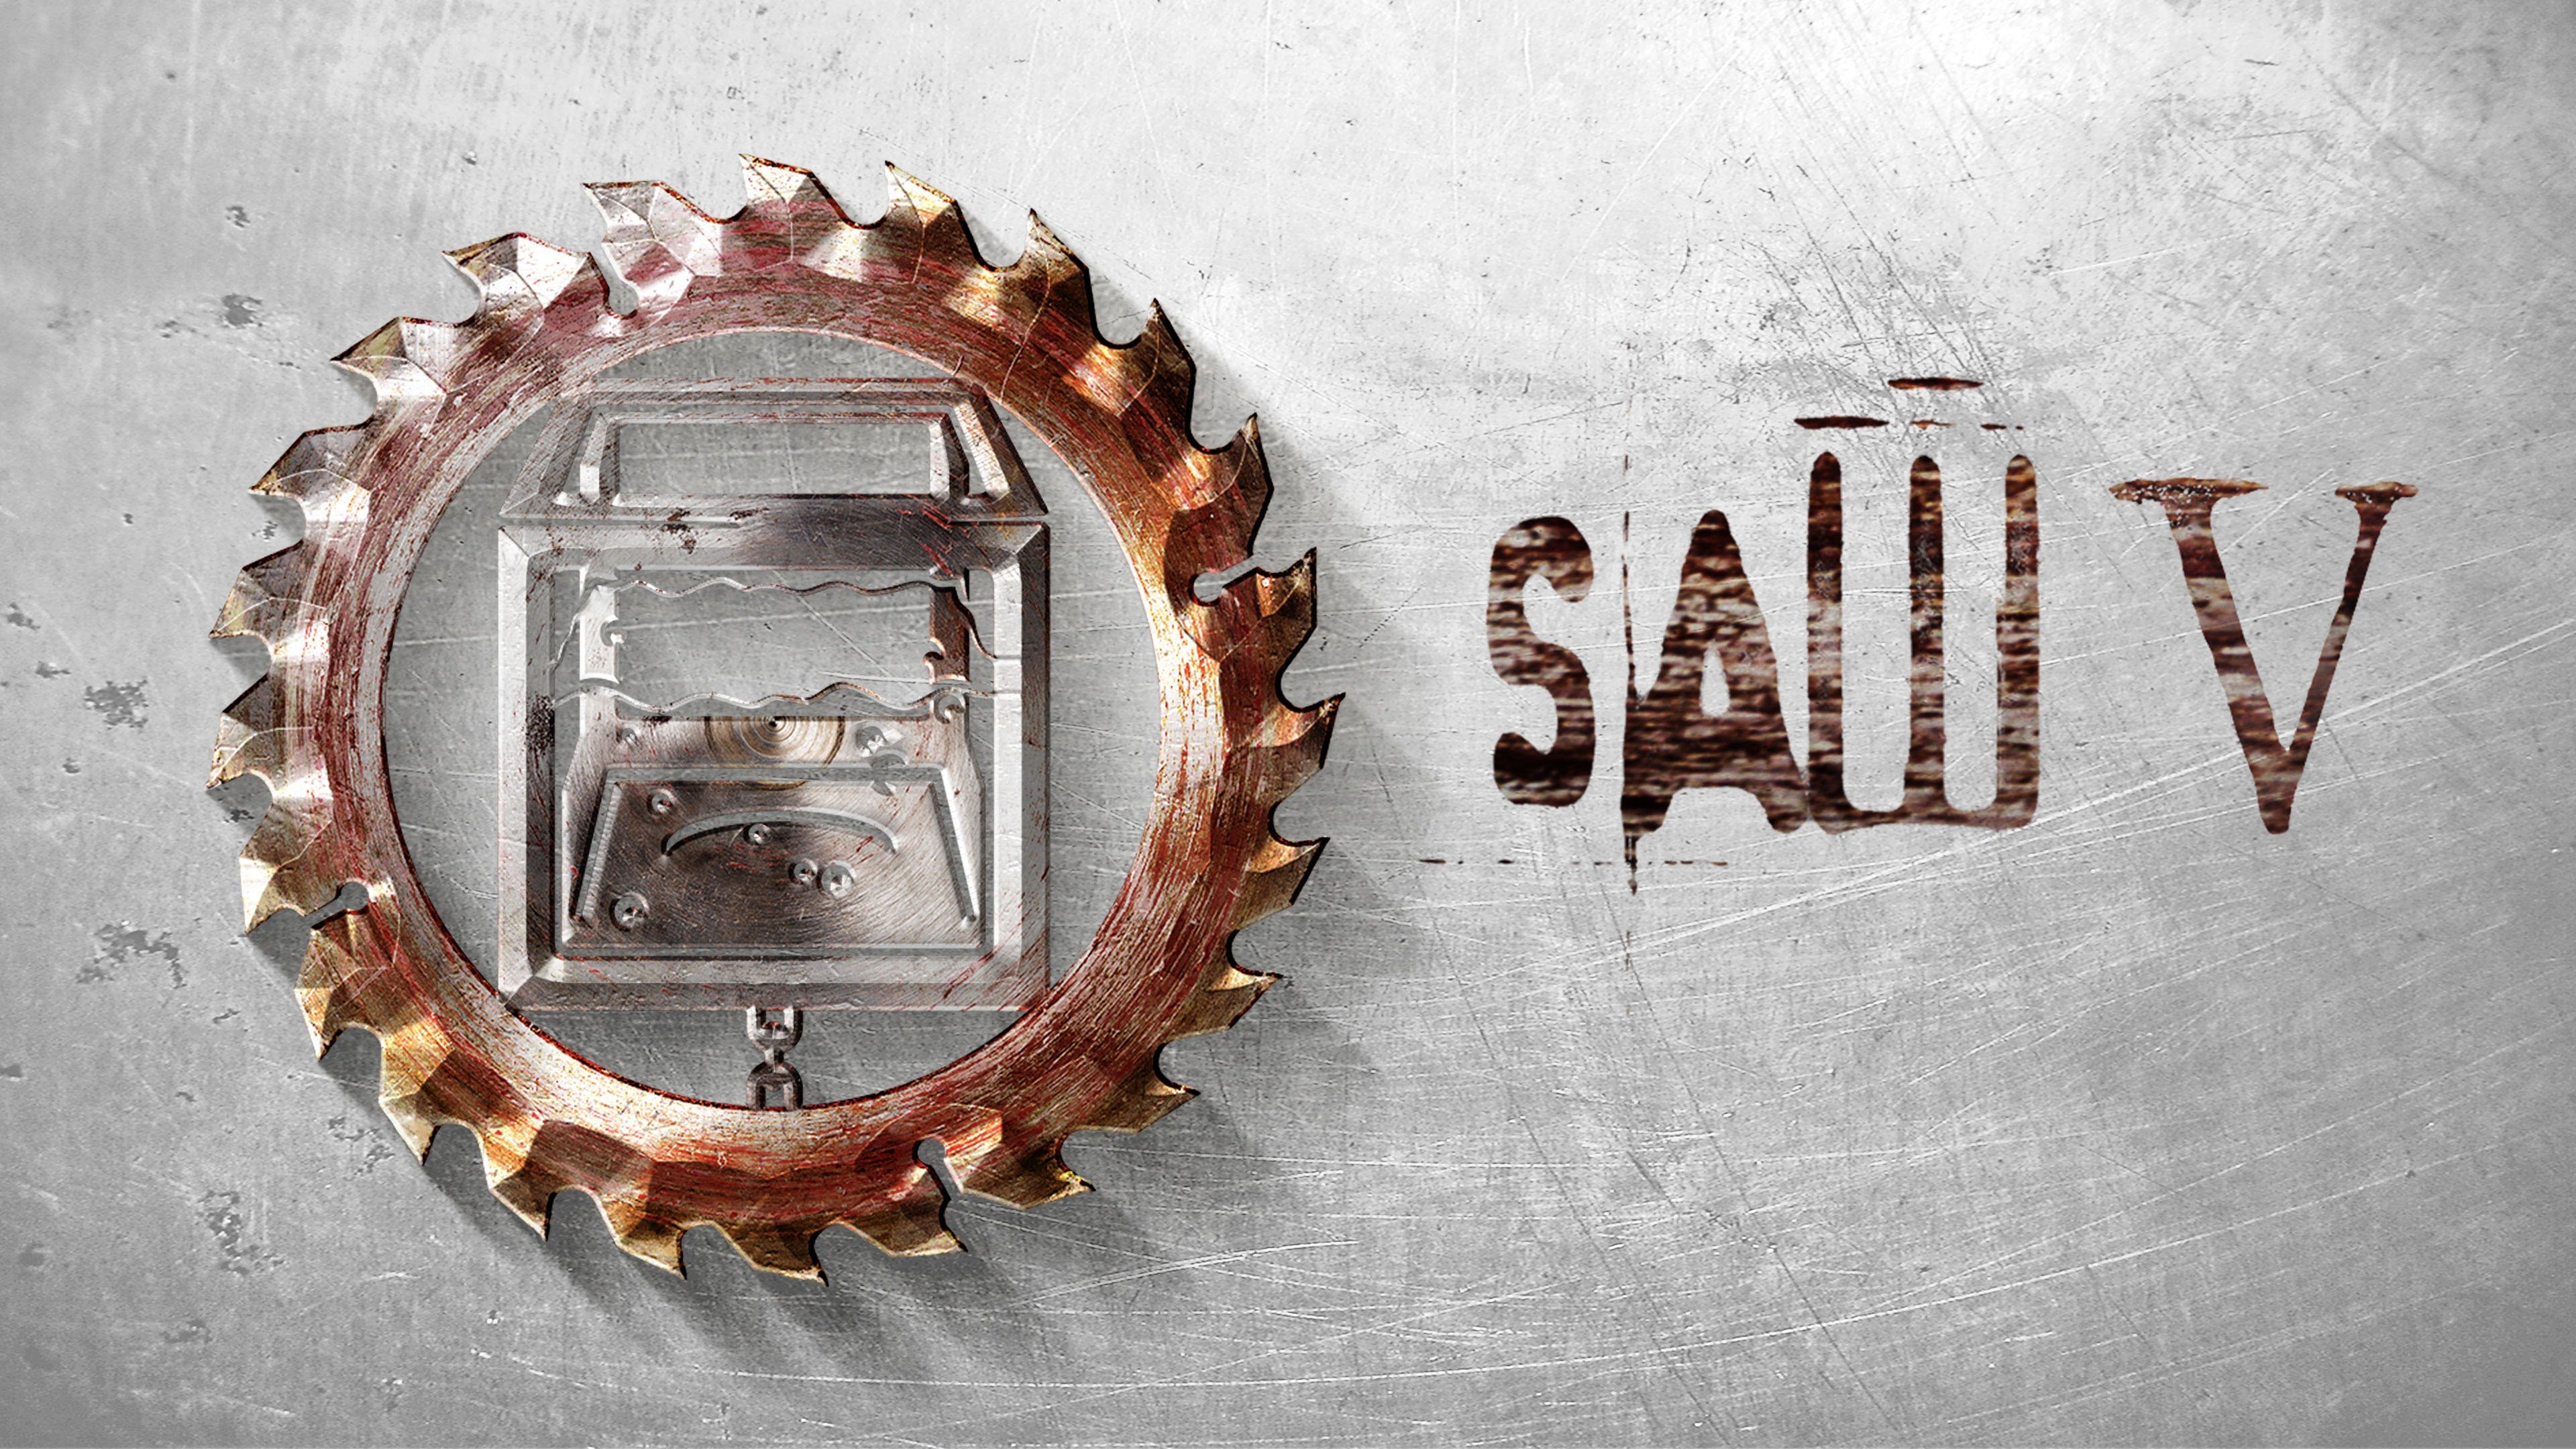 Watch Saw X movie streaming online | BetaSeries.com